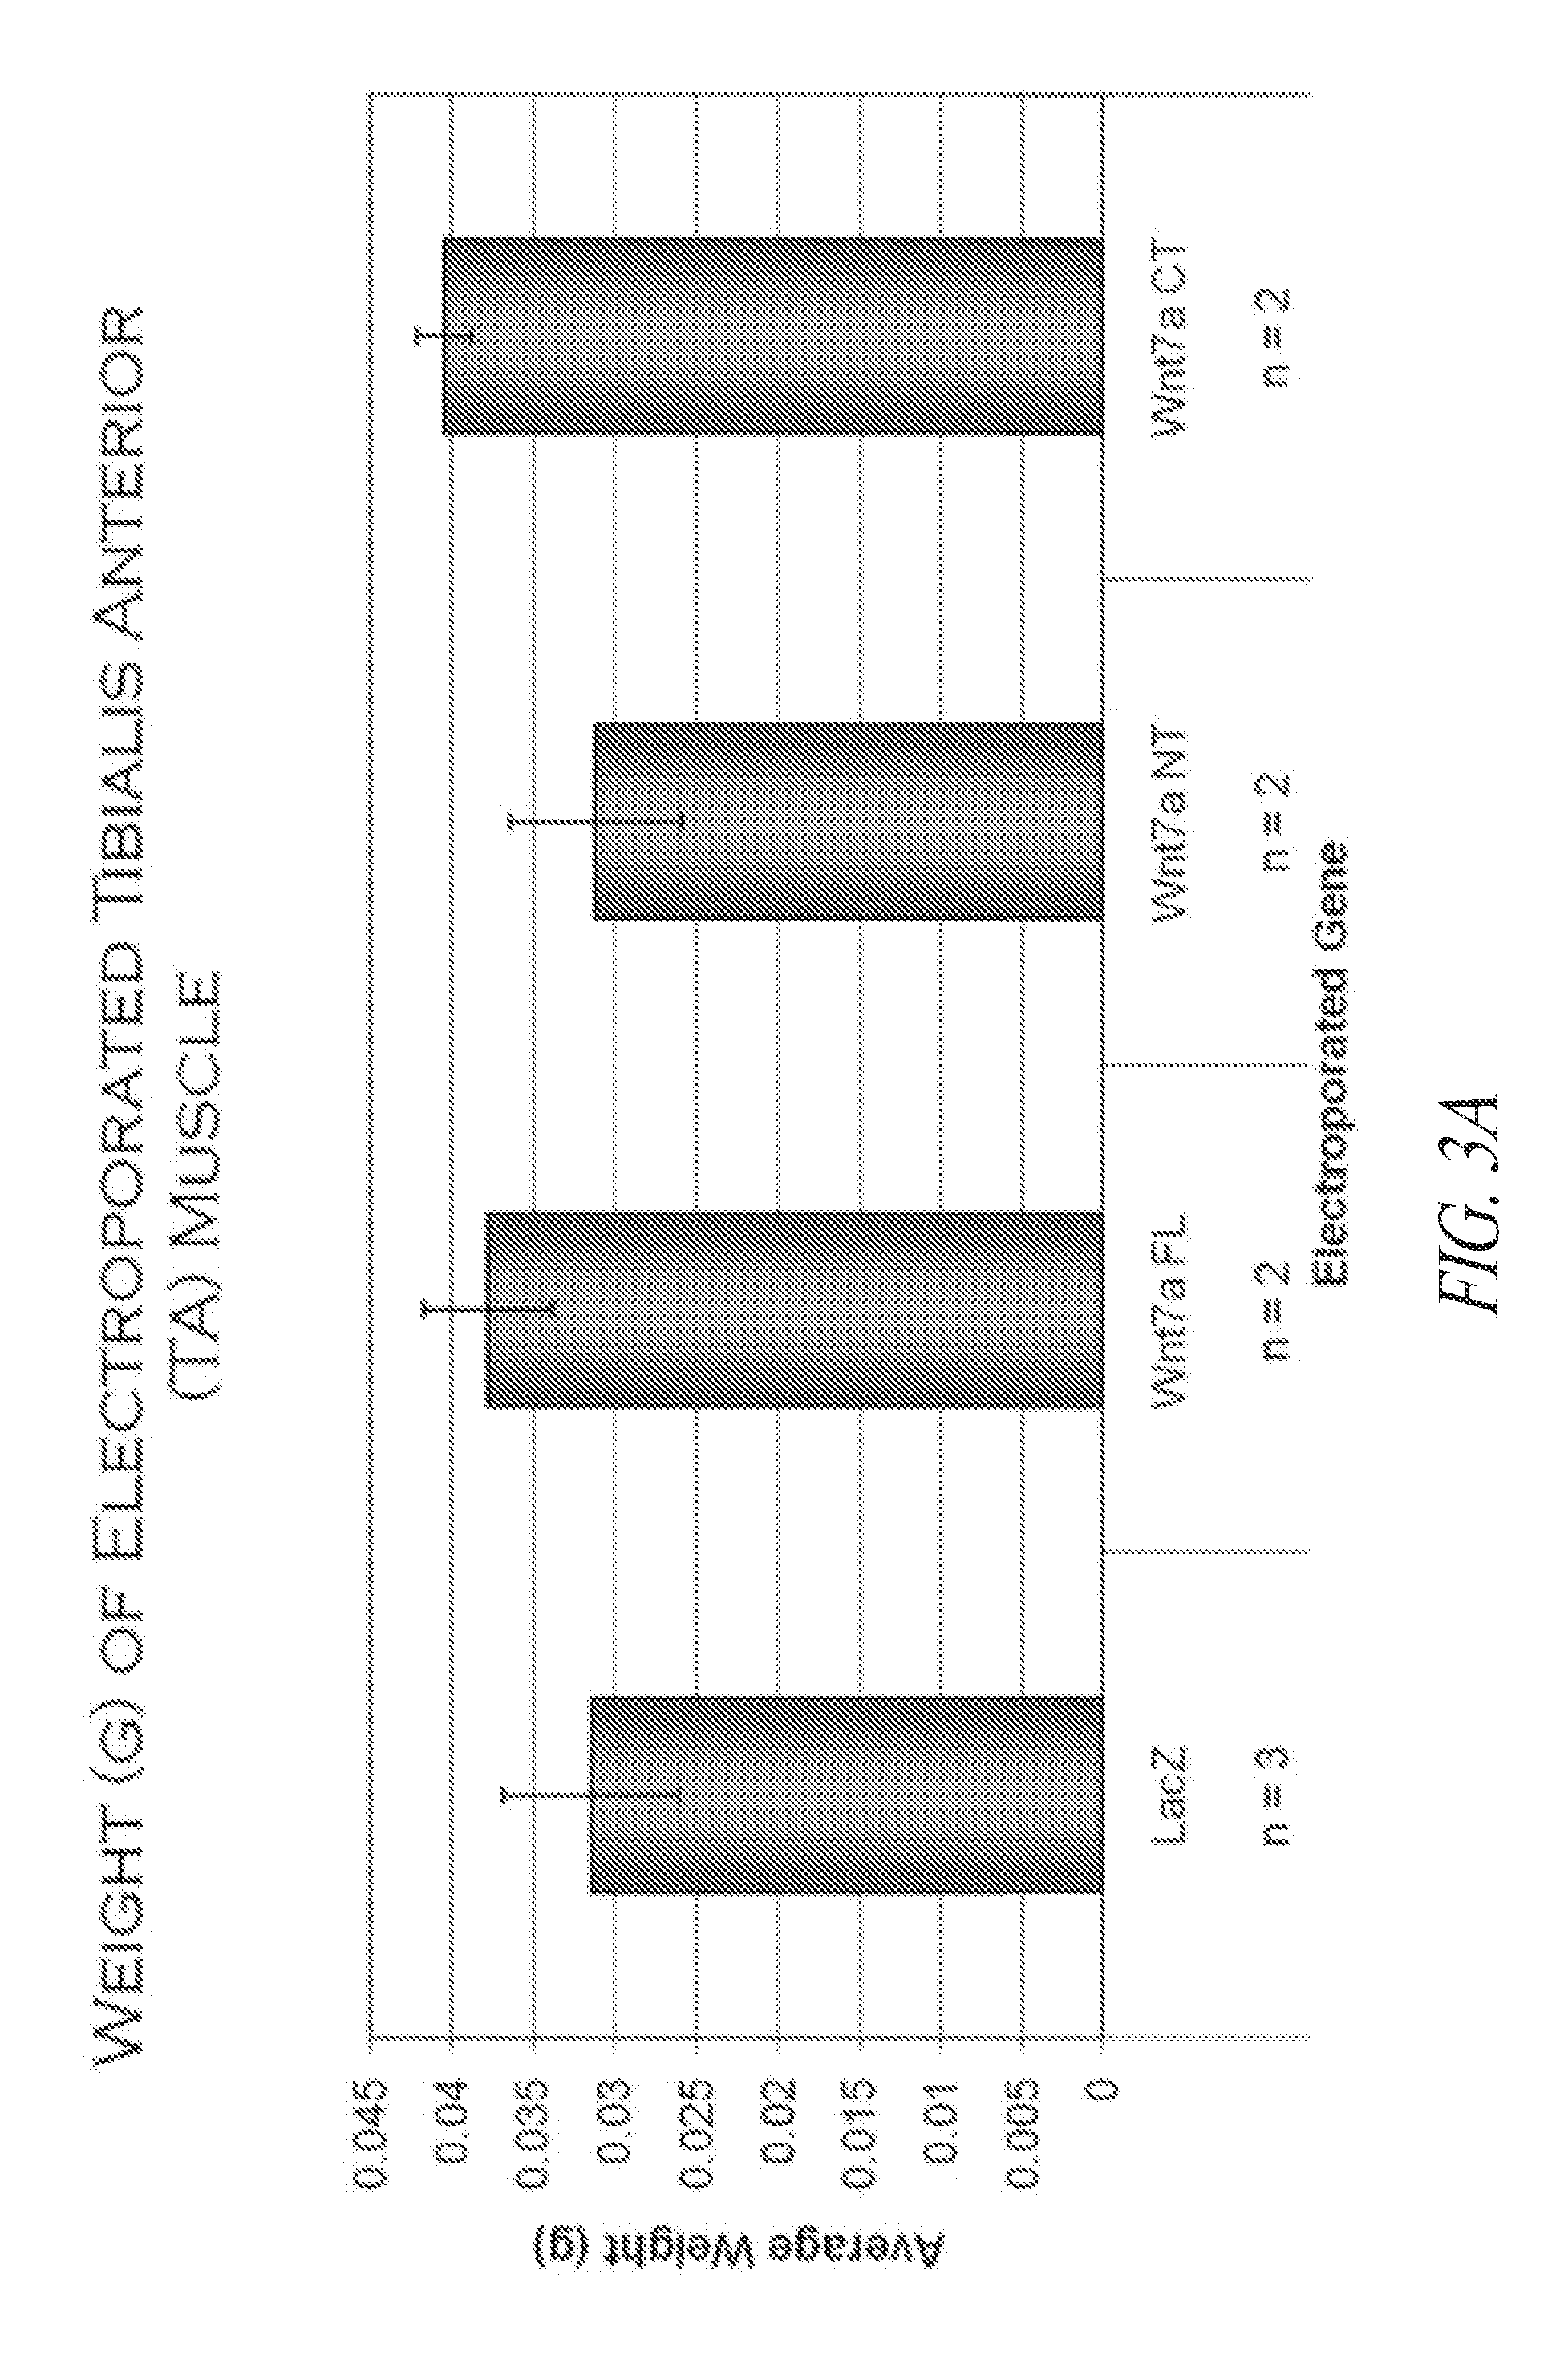 Wnt7a compositions and method of using the same